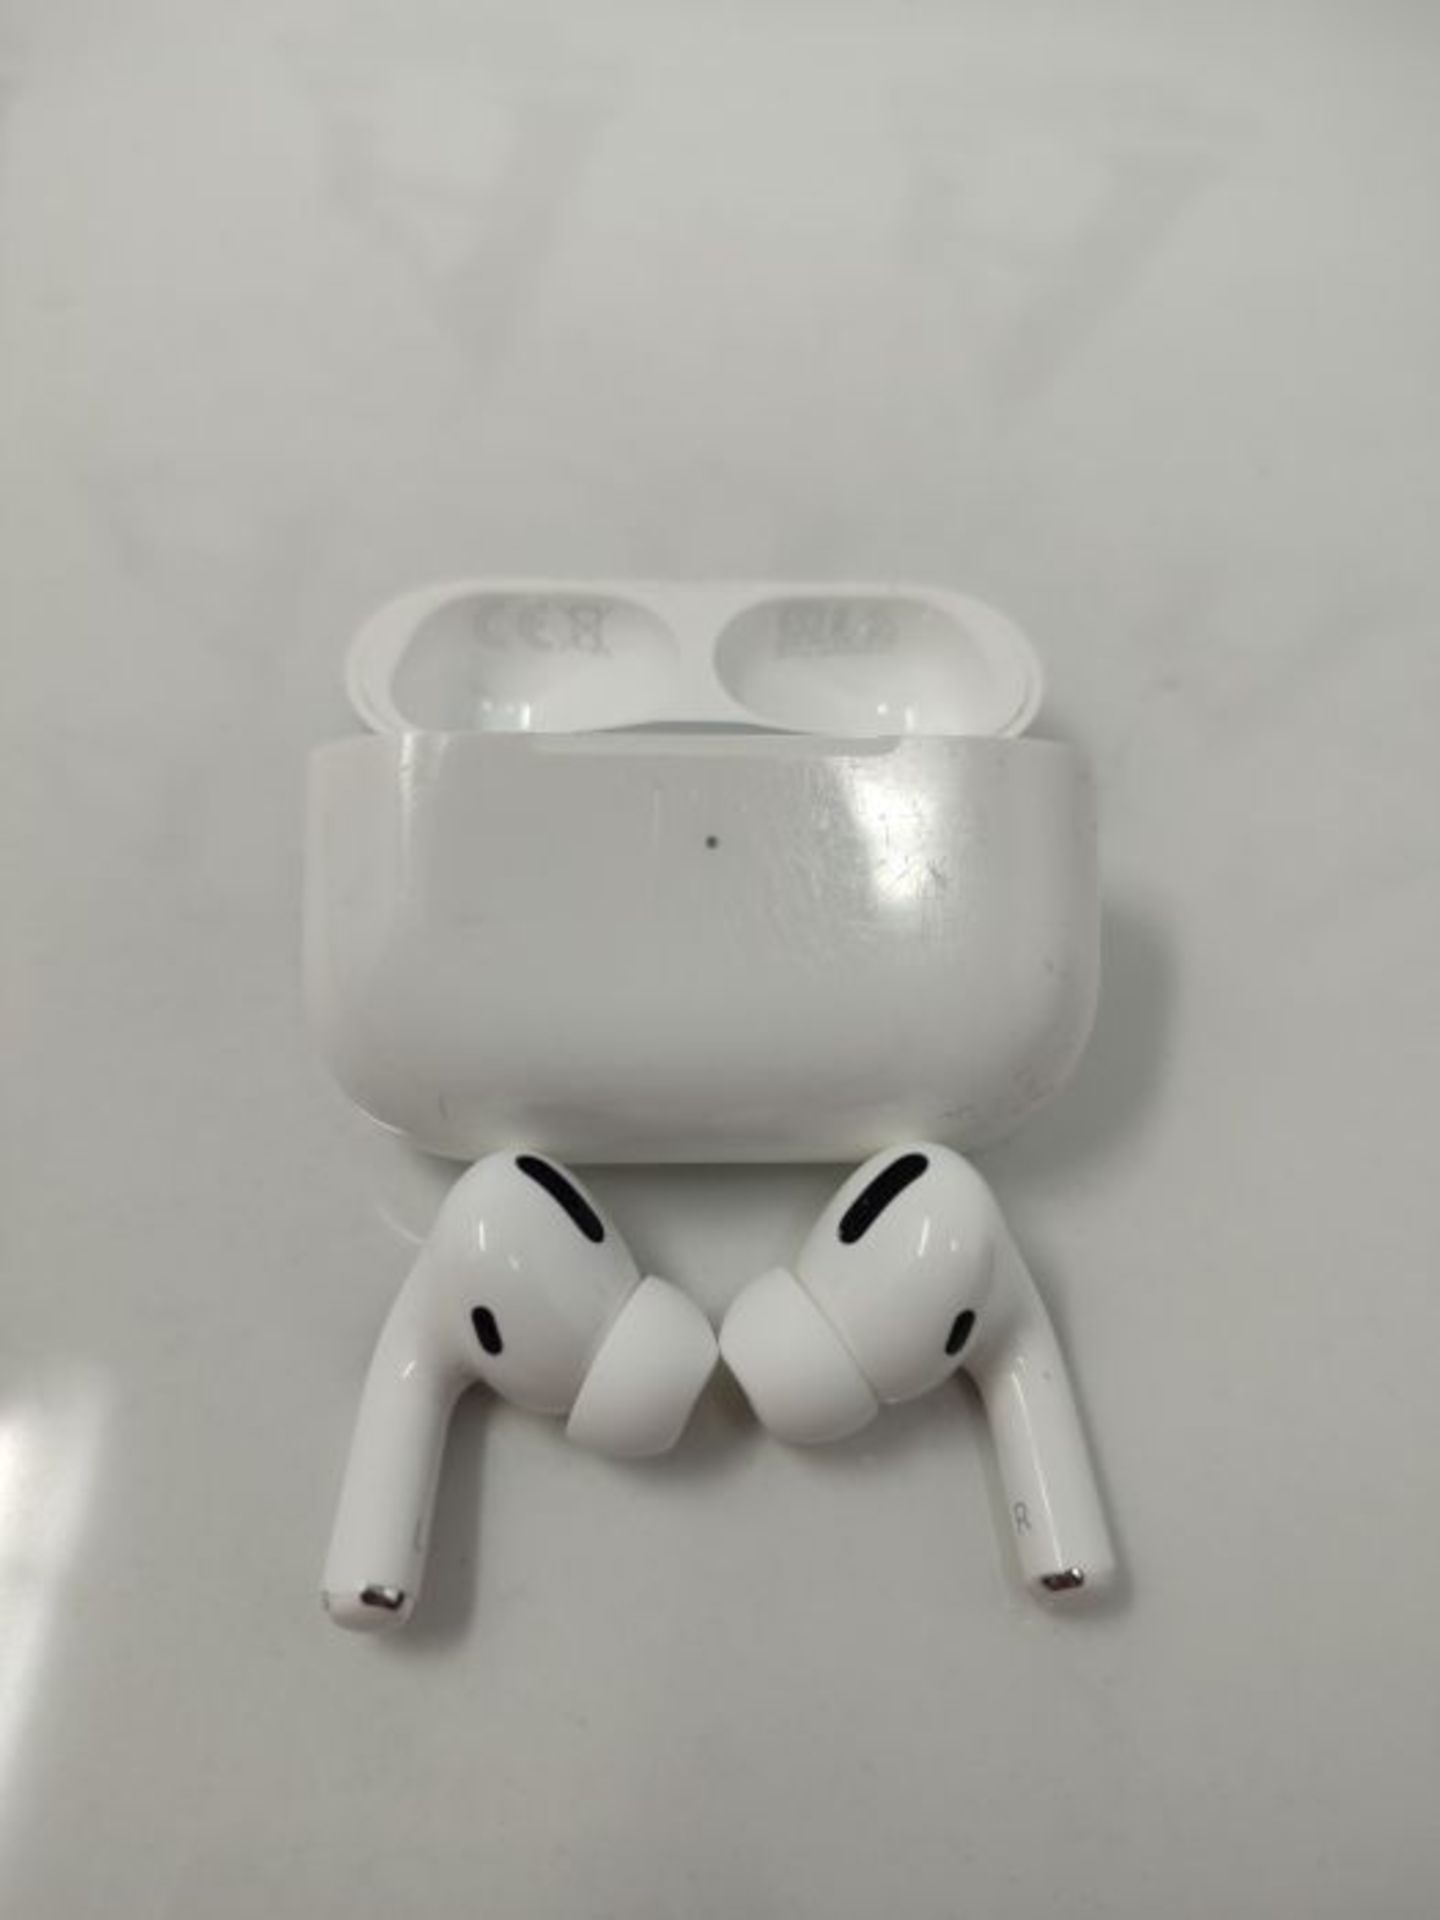 RRP £213.00 Apple AirPods Pro (1. generation) with Wireless charging case (2019) - Image 2 of 2